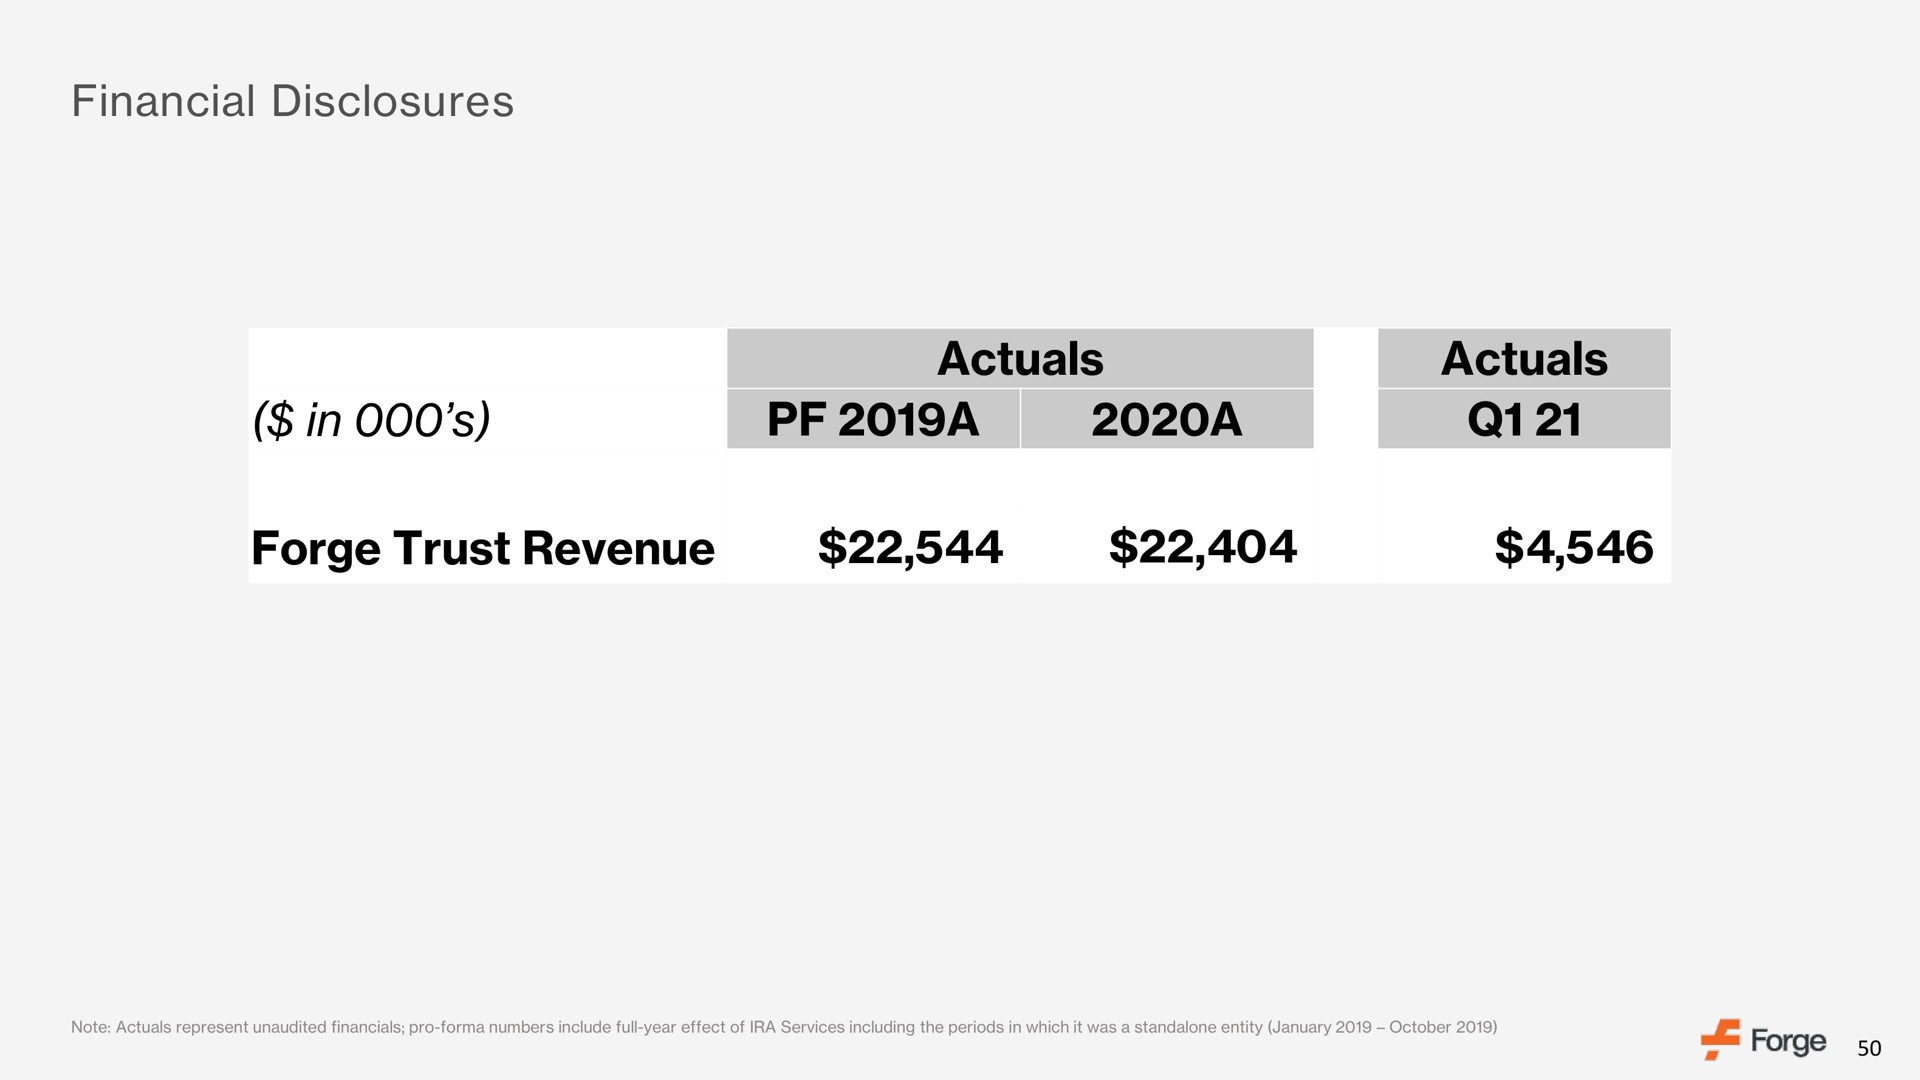 financial disclosures in a a forge trust revenue | Forge